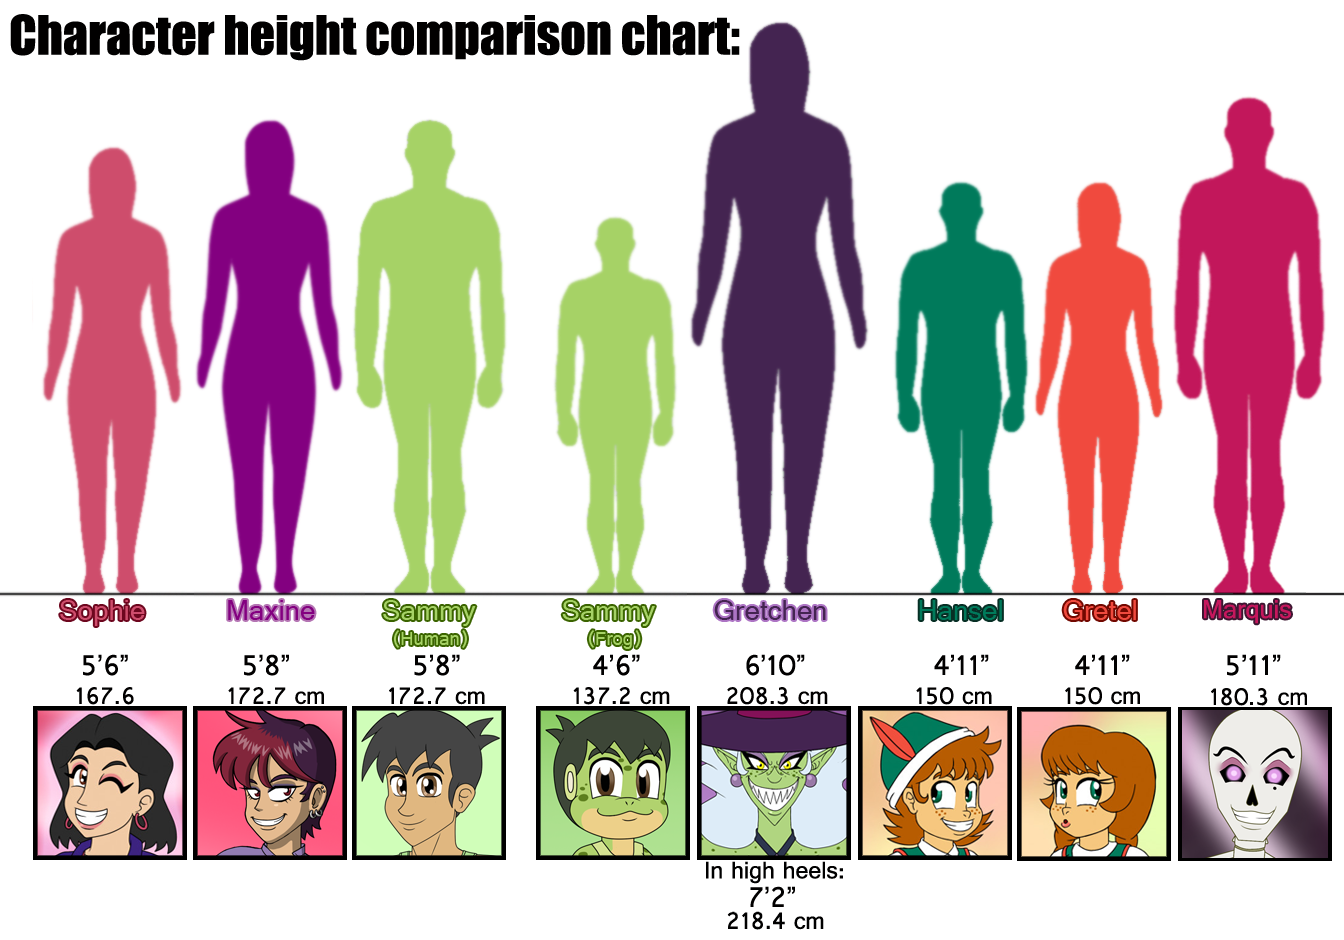 F height. Height Comparison Chart. Height Comparison characters. Character height Chart. Comparing heights.